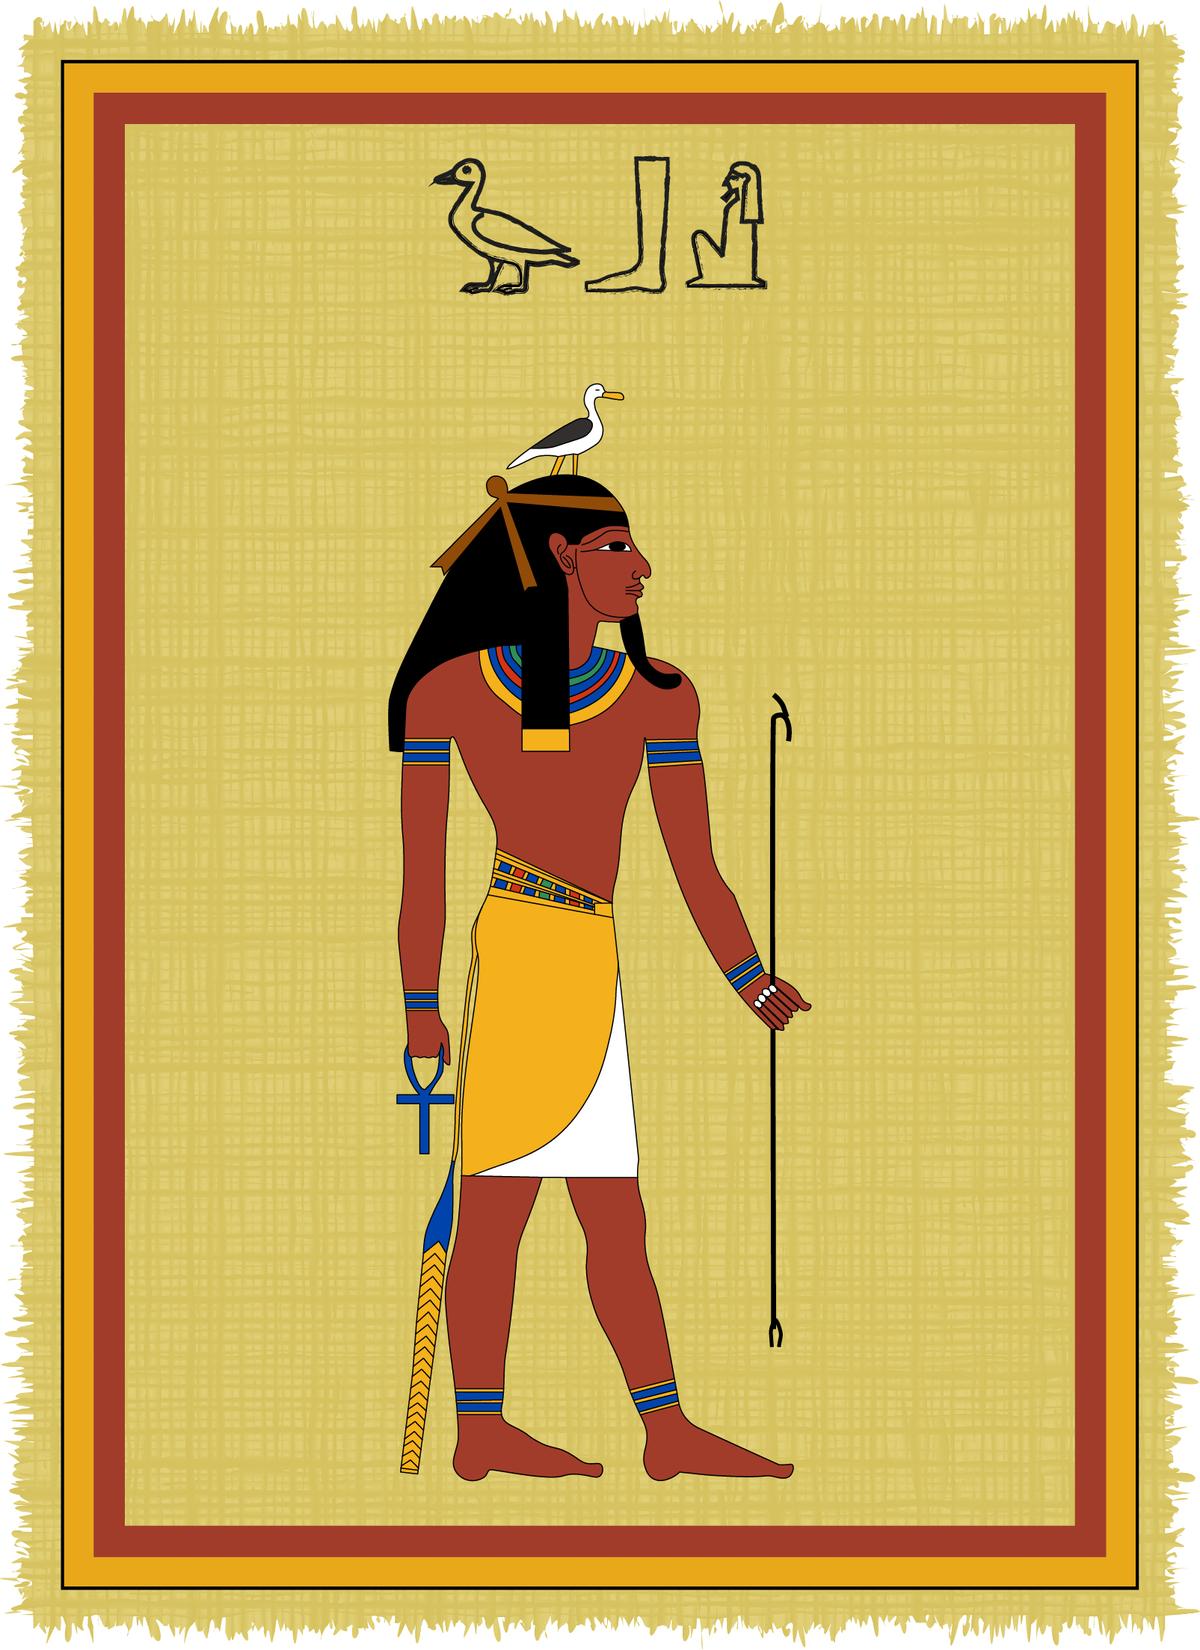 ©Shutterstock | <a href="https://www.shutterstock.com/image-vector/papyrus-image-geb-ancient-egyptian-god-790192390?src=px051taeYW0GsCVnS0RIRg-1-2&studio=1">AndreyO</a>